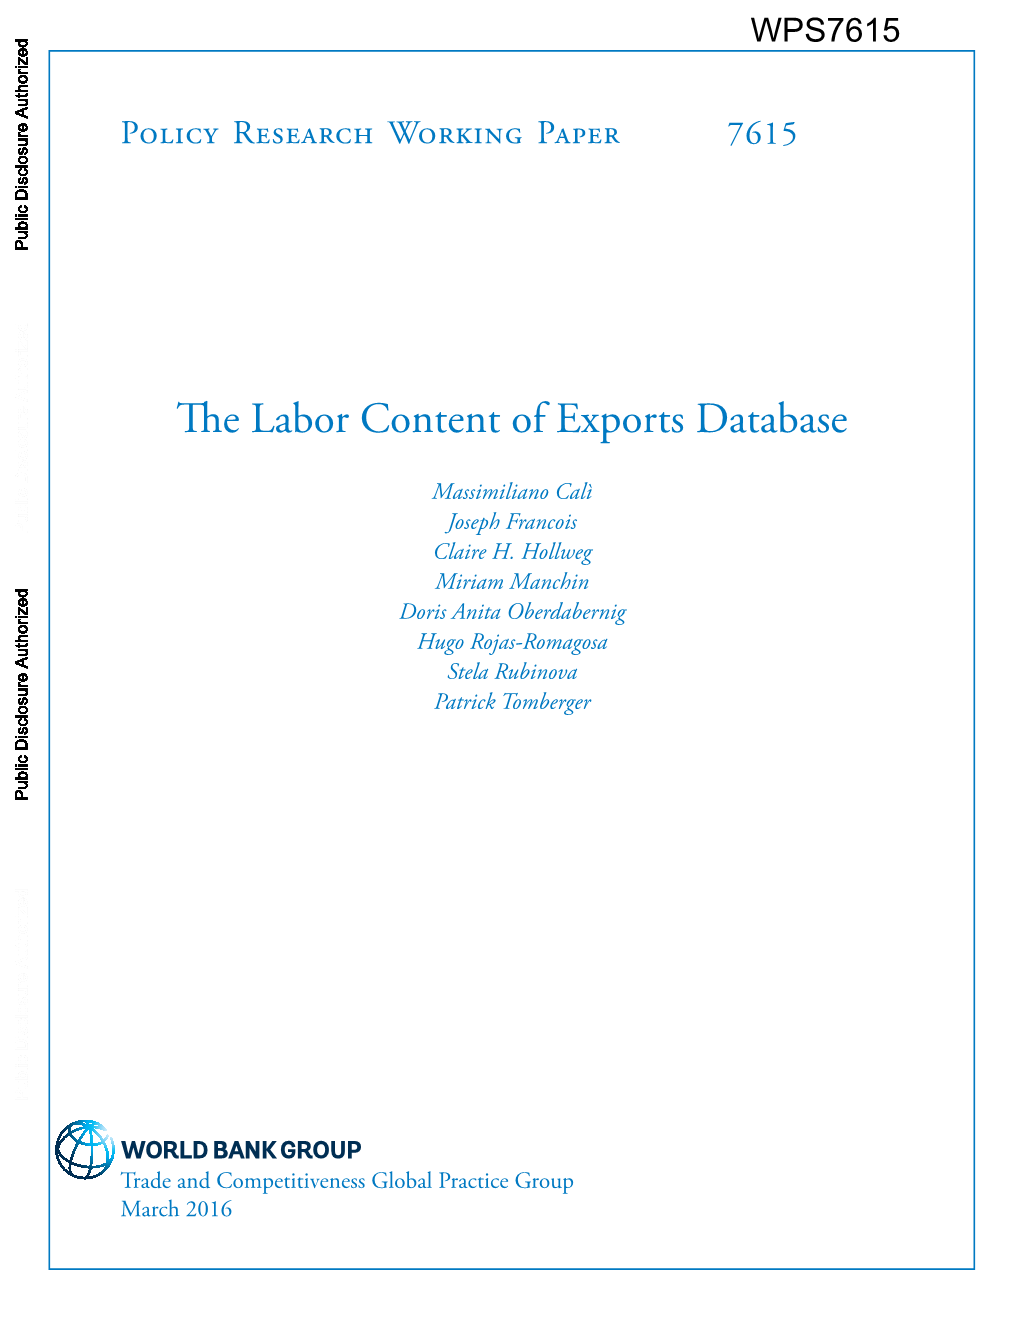 The Labor Content of Exports Database